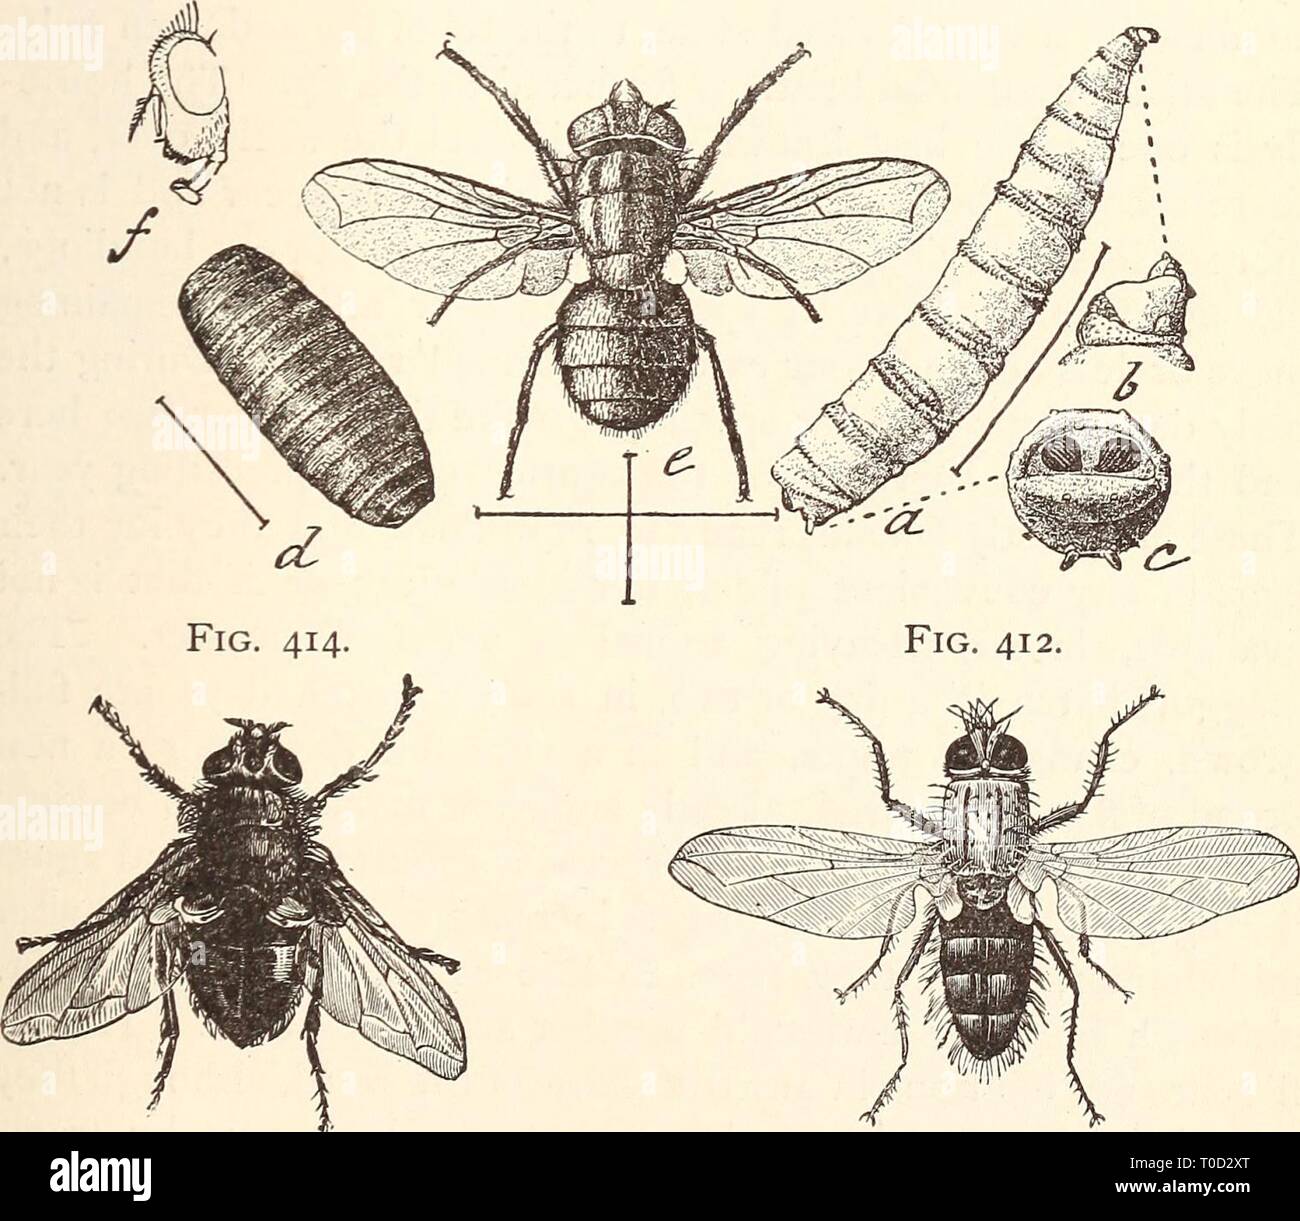 Economic entomology for the farmer Economic entomology for the farmer.. economicentomolo00smit 0 Year: 1896  Fig. 415.    Muscid flies.—Fig. 410, Exorista flavicauda, yellow-tailed Tachinid. Fig. 411, ISe- morea leucanics, Tachinid on cut-worms : larva, pupa, adult, and the white eggs on the anterior segments of the caterpillar. Fig. 412, Lydella doryphorcs, Tachinid on potato-beetle. Fig. 413, common flesh-fly, Sarcophaga carnaria. Fig. 414, the blow- fly, Calliphora vomitoria. Fig. 415, screw-worm, Lucilia tnacellaria : a, b, c, larva and details; rf, pupa ; ^, adult; /, head from side. All  Stock Photo